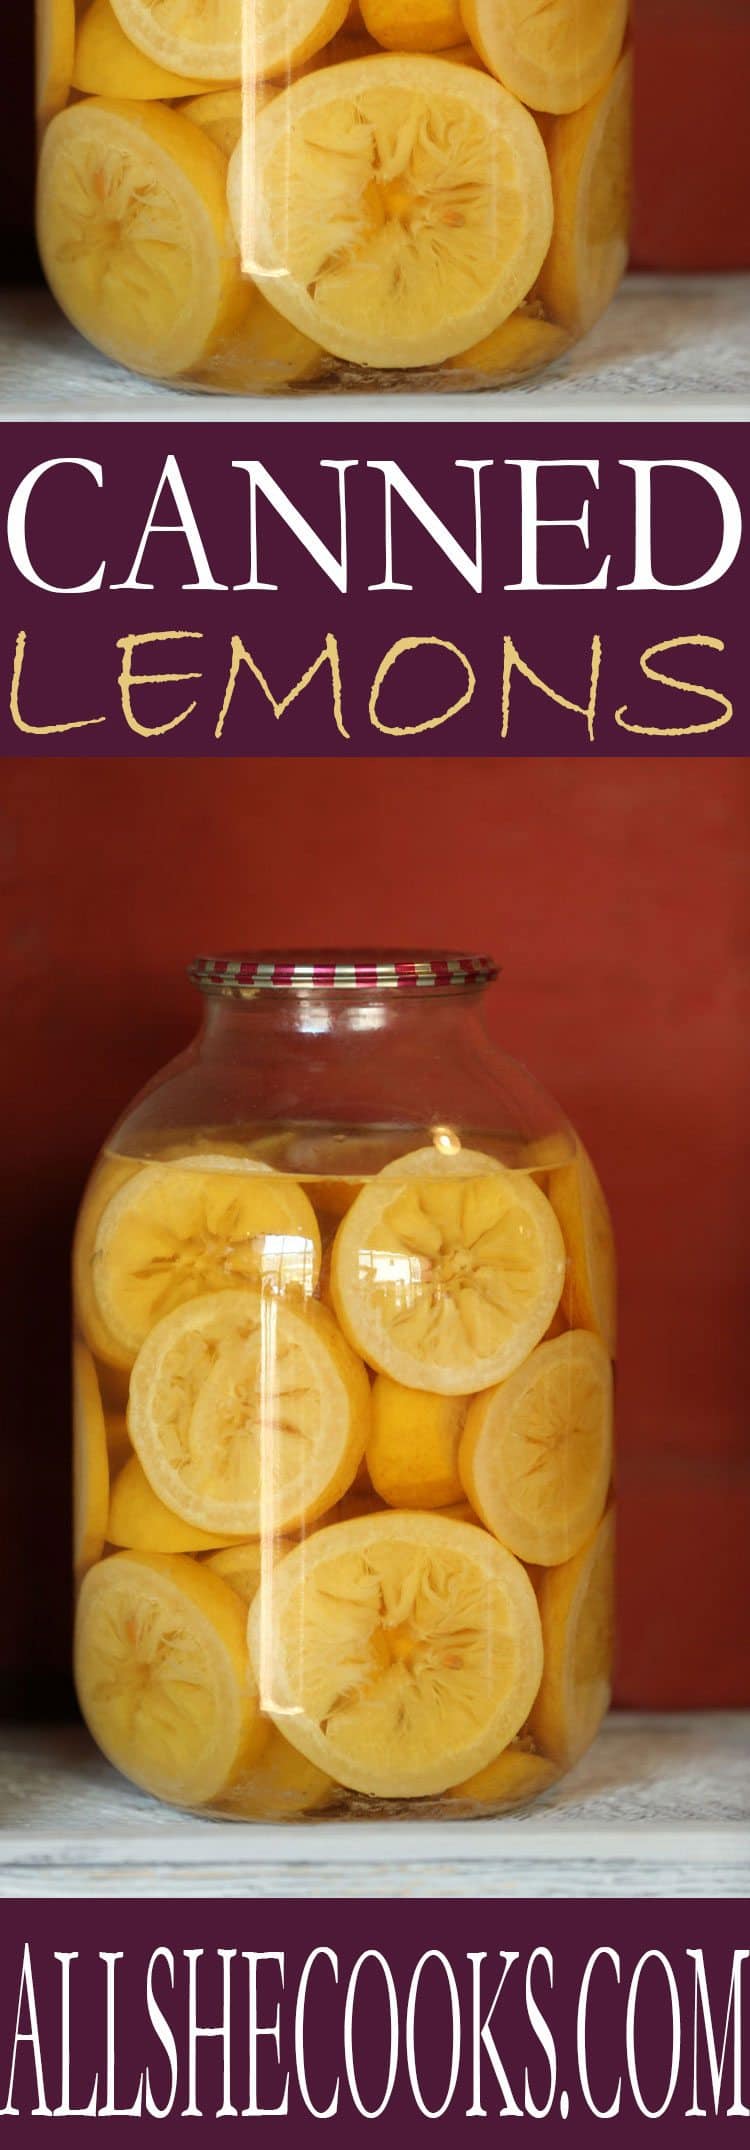 Canned Lemons recipe is perfect for preserving lemons to serve up with tea or iced water. Refreshing and an ideal way to make use of an abundance of lemons from your lemon tree. recipe lemon preserves